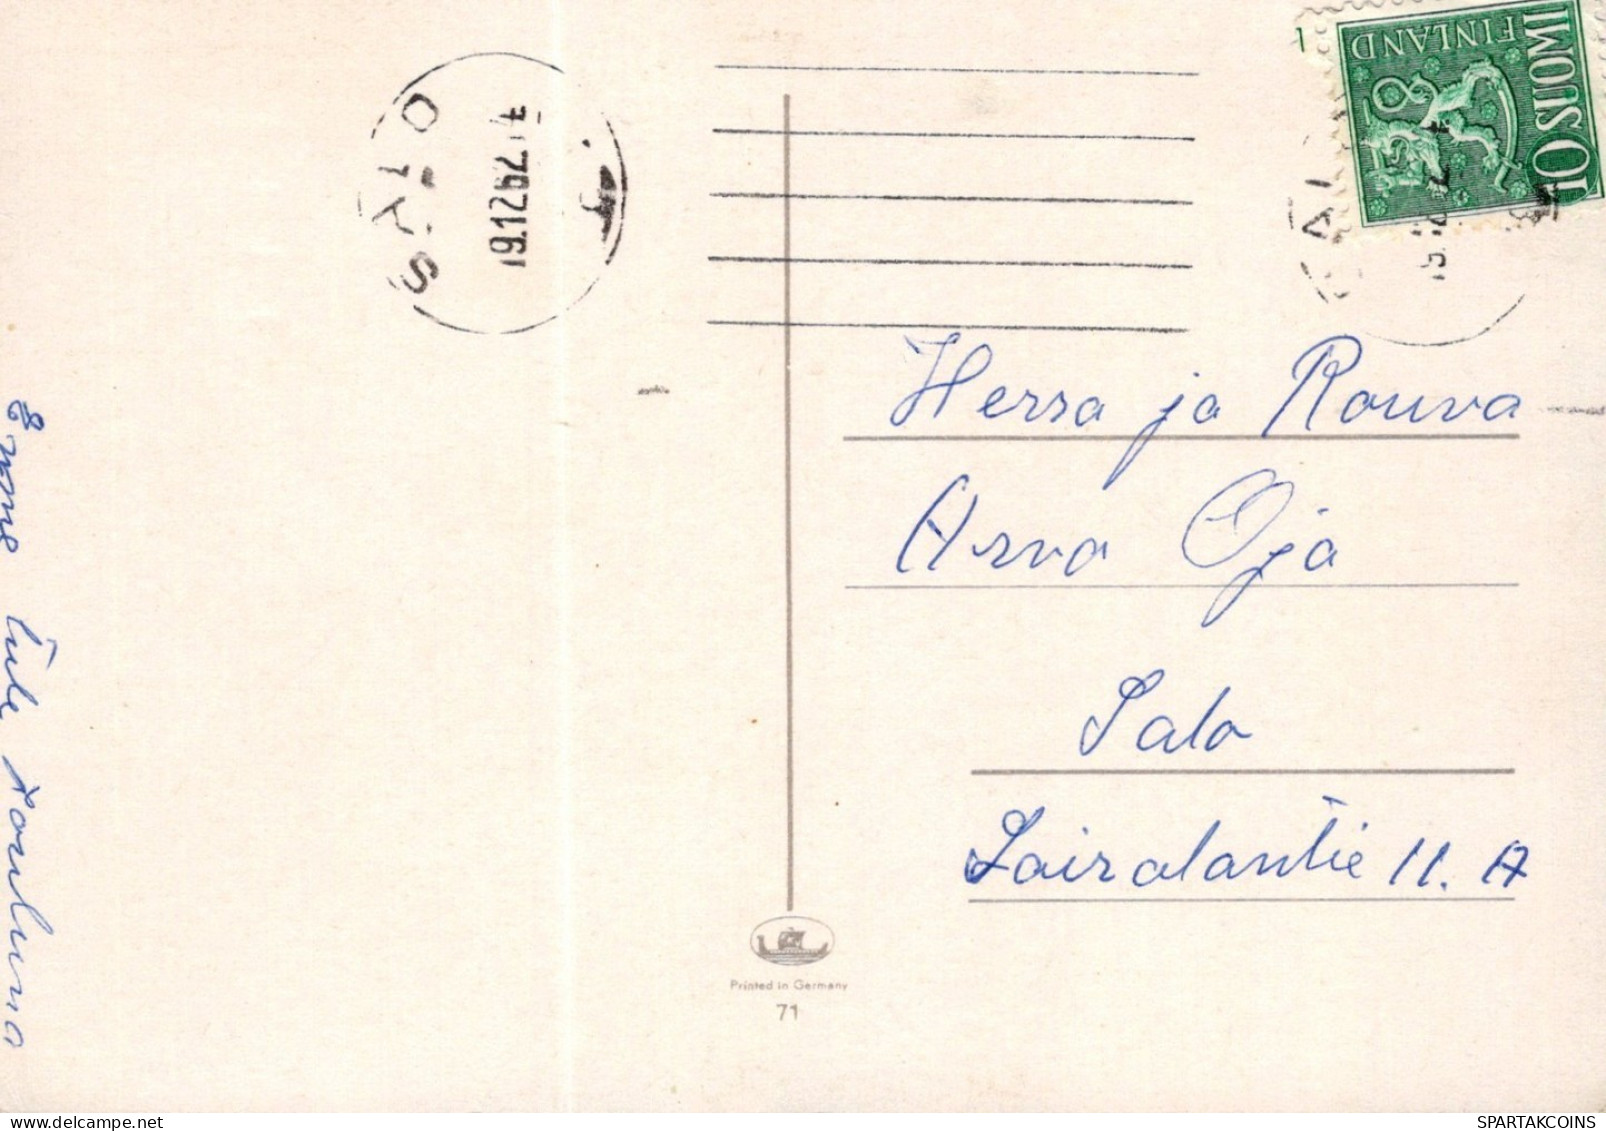 ANGELO Buon Anno Natale Vintage Cartolina CPSMPF #PAG726.IT - Anges